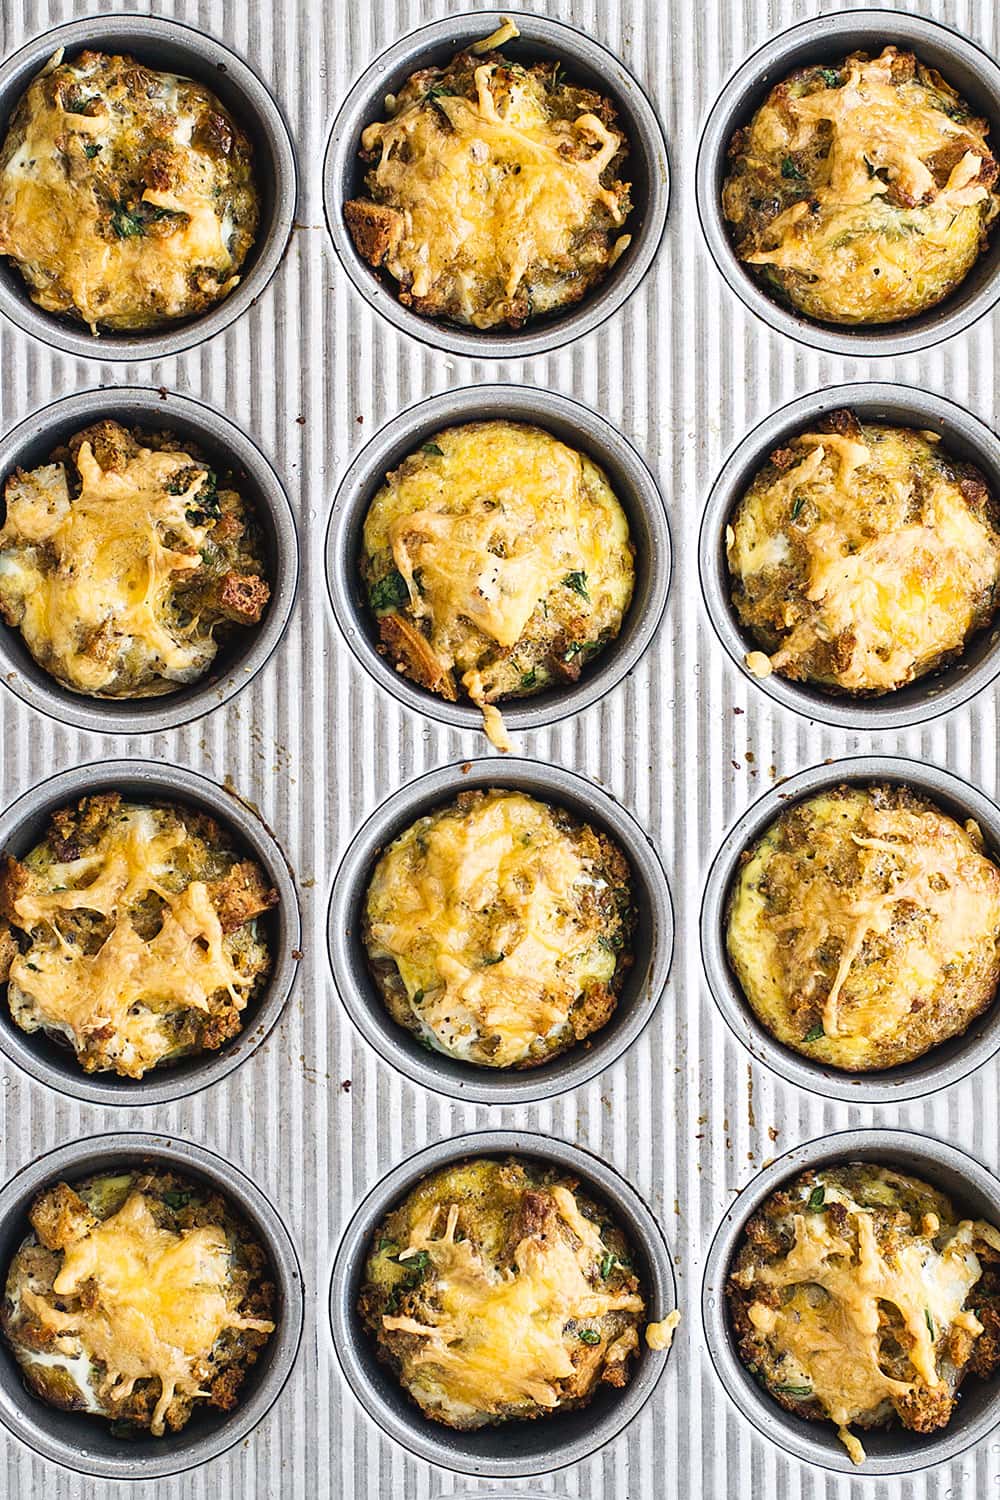 Thanksgiving Leftover Stuffing Muffins are made in minutes with leftover stuffing and turkey for a tasty breakfast or snack that you can dip in cranberry sauce or gravy!